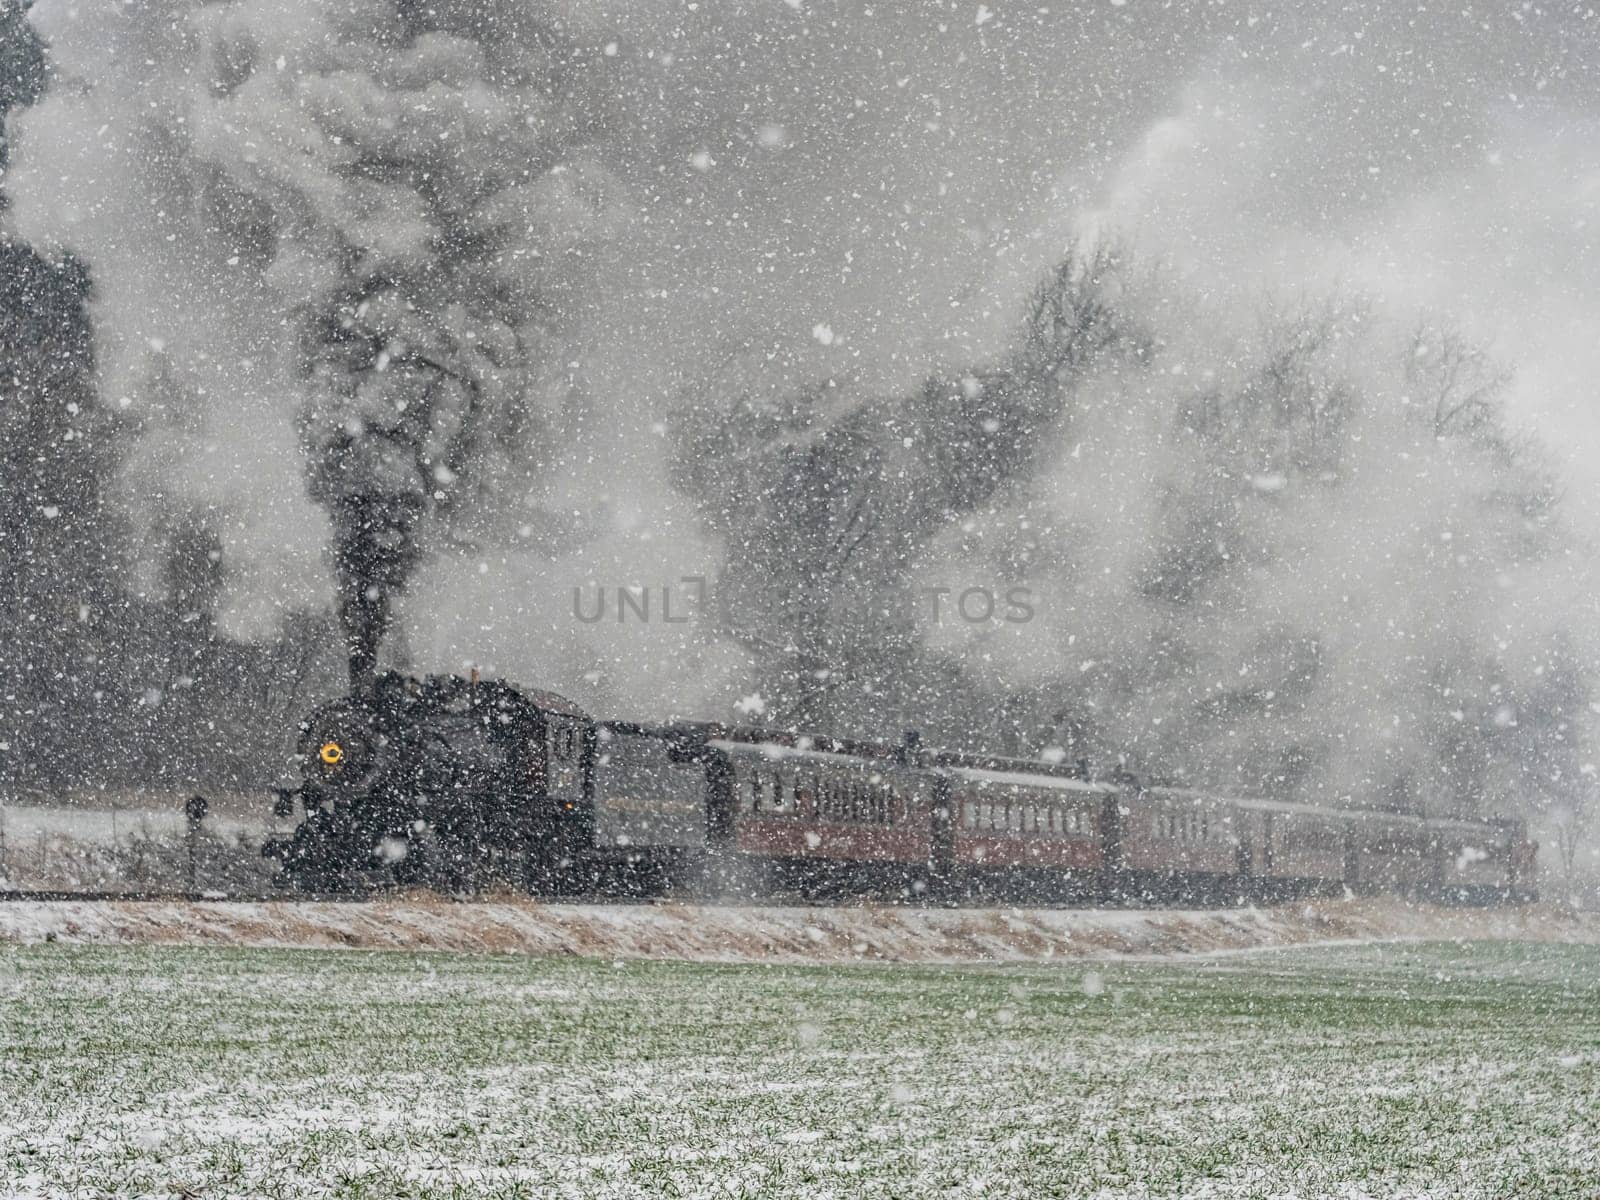 Train is traveling through a snowy field. The steam from the train is visible in the air by actionphoto50